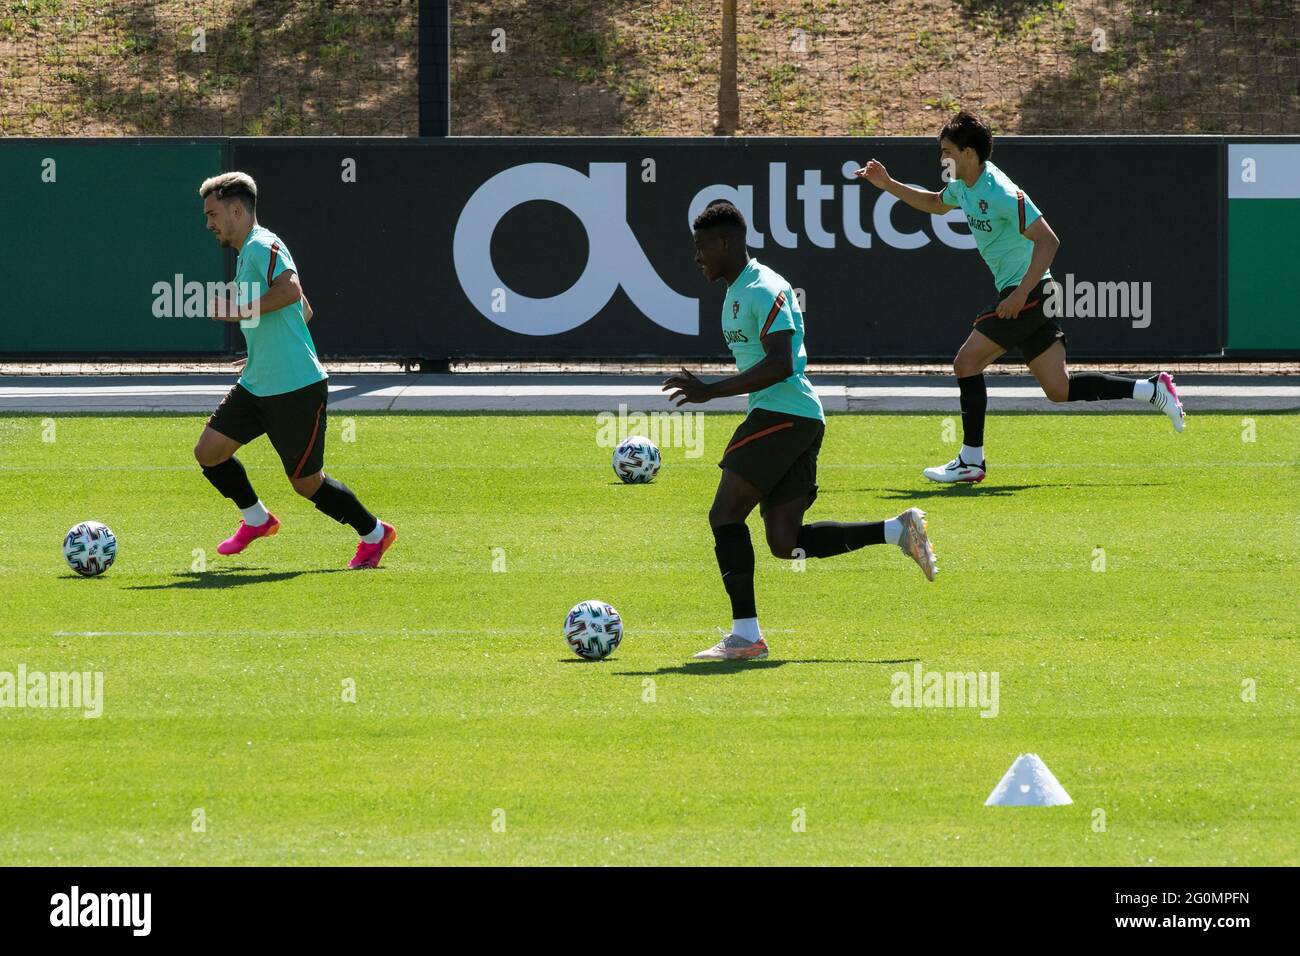 Oeiras, Portugal. 02nd June, 2021. Pedro Goncalves (L), Nuno Mendes (C) and Joao Felix (R) in action during the training session at Cidade do Futebol training ground.Portugal football team trains before competing in the European football championship - EURO 2020 - scheduled to start on June 11th. (Photo by Hugo Amaral/SOPA Images/Sipa USA) Credit: Sipa USA/Alamy Live News Stock Photo